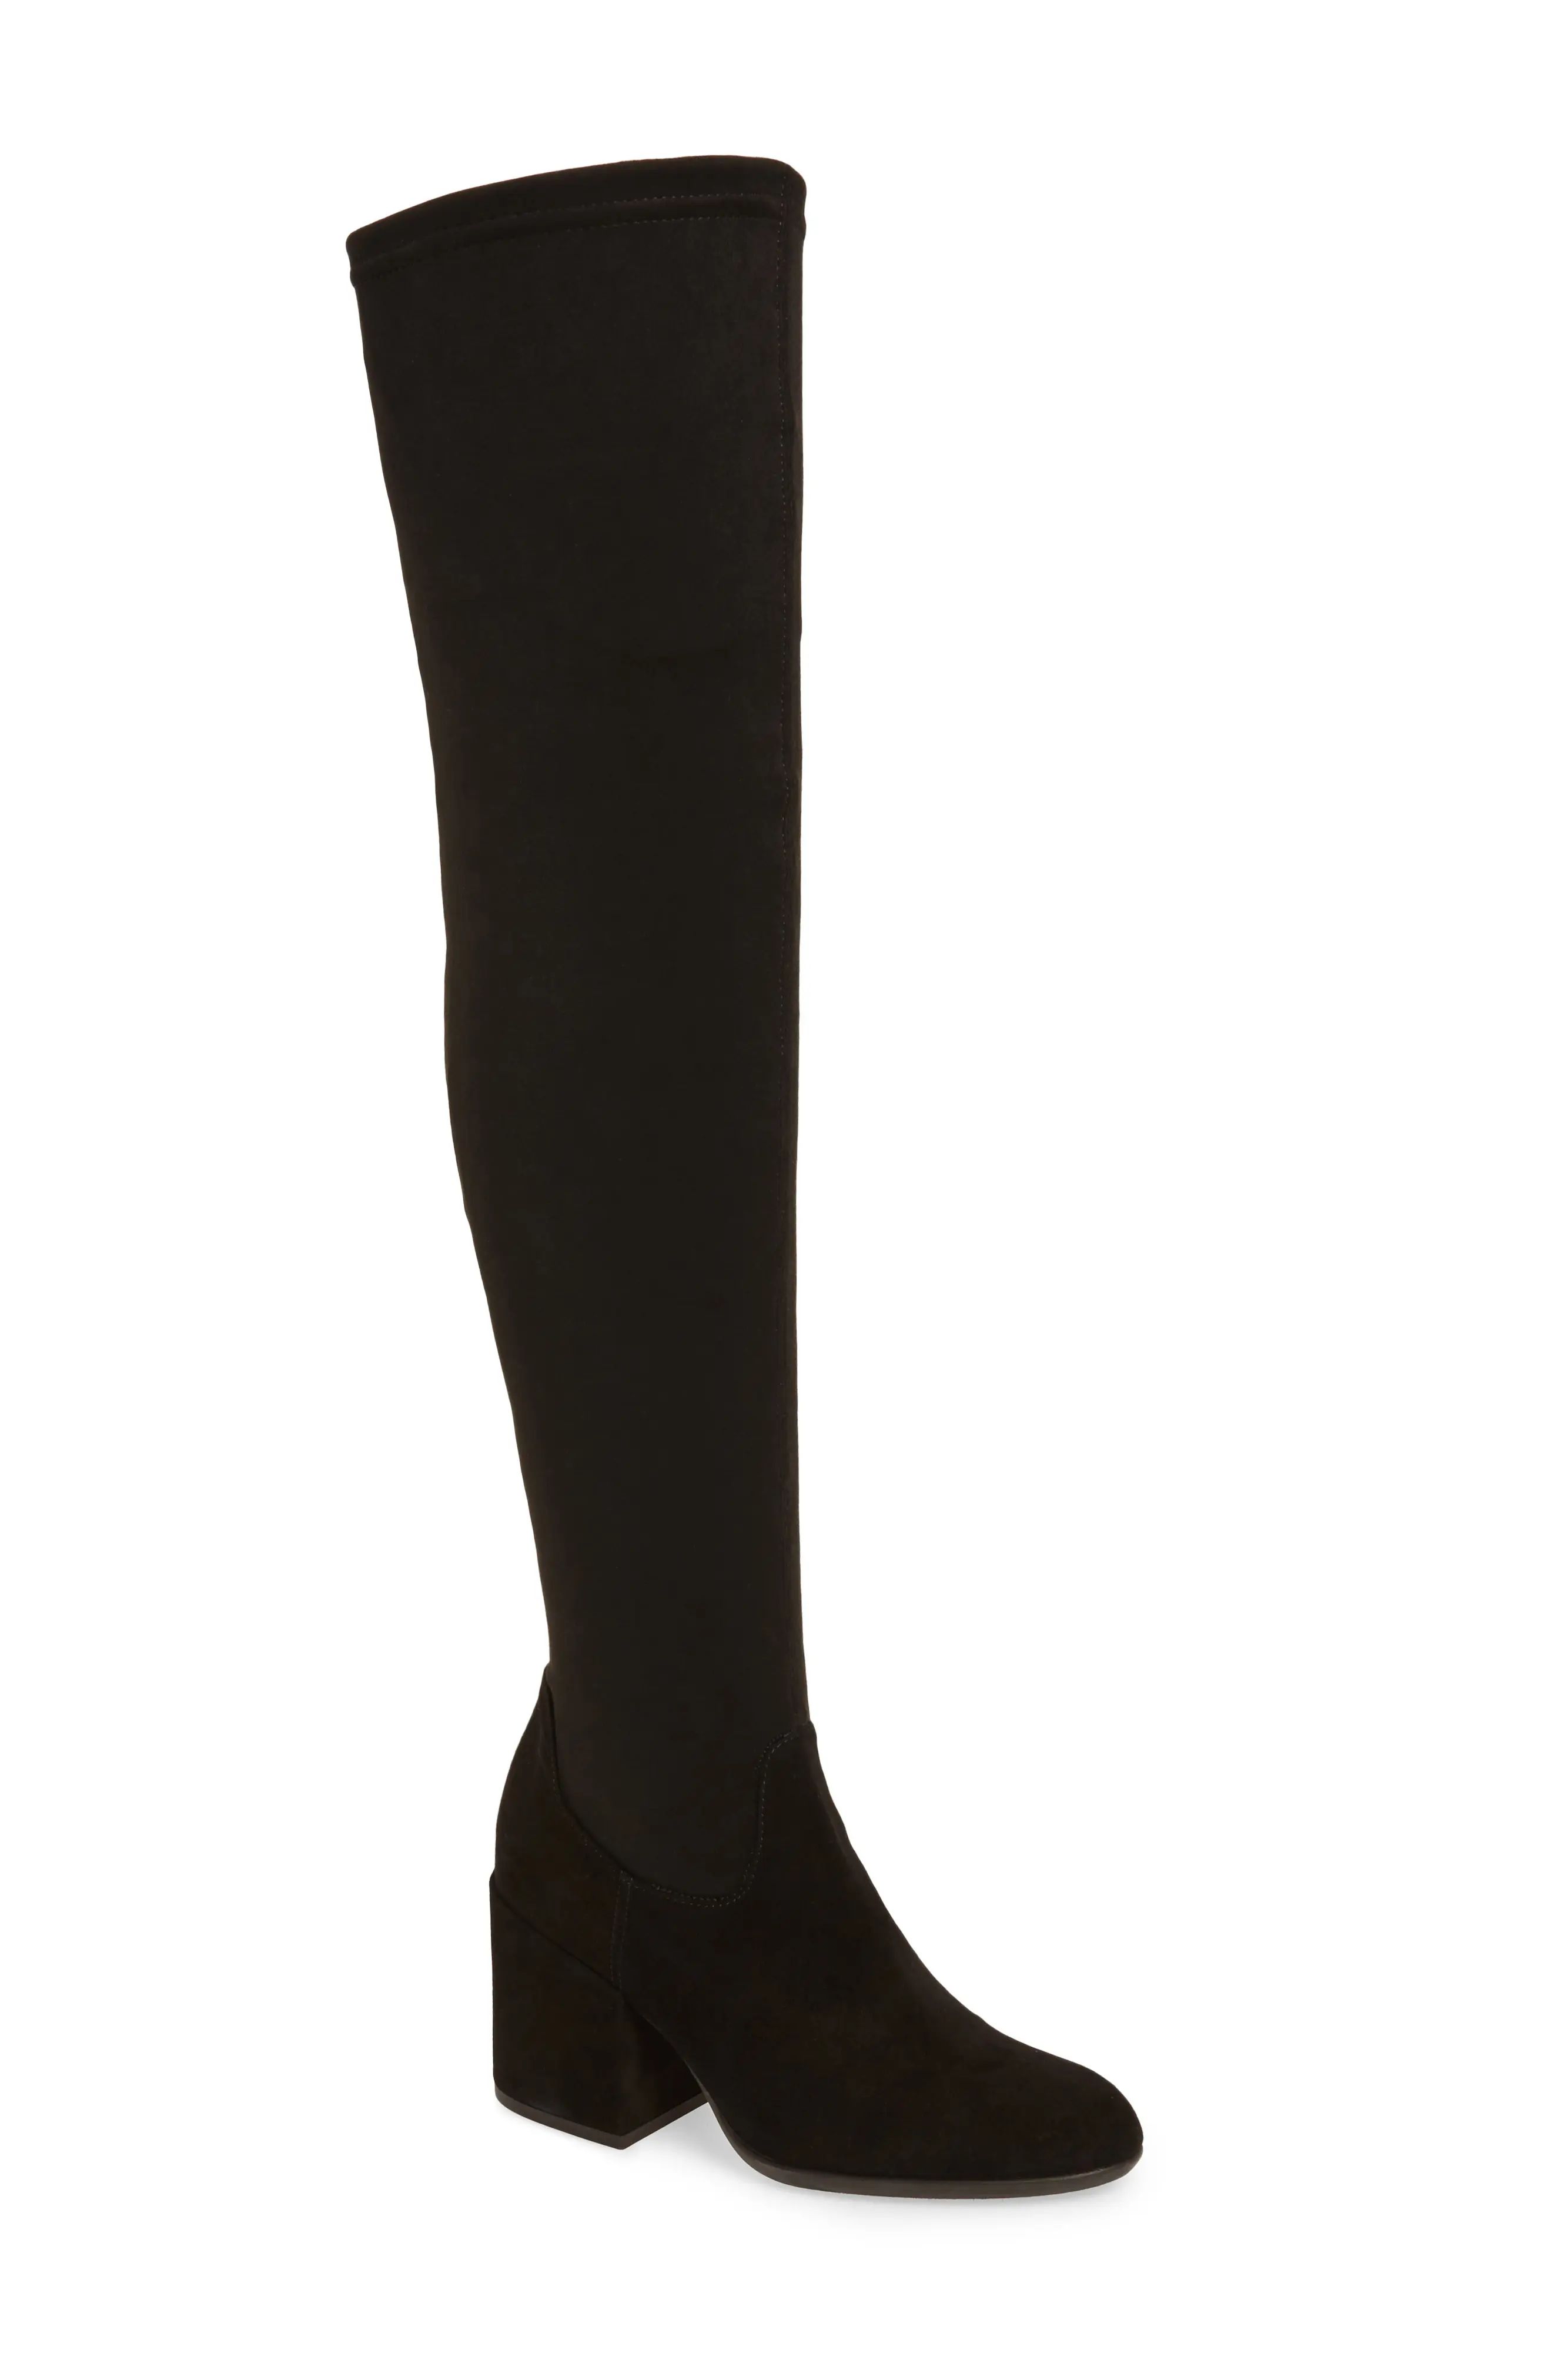 Verve Over the Knee Boot | Nordstrom